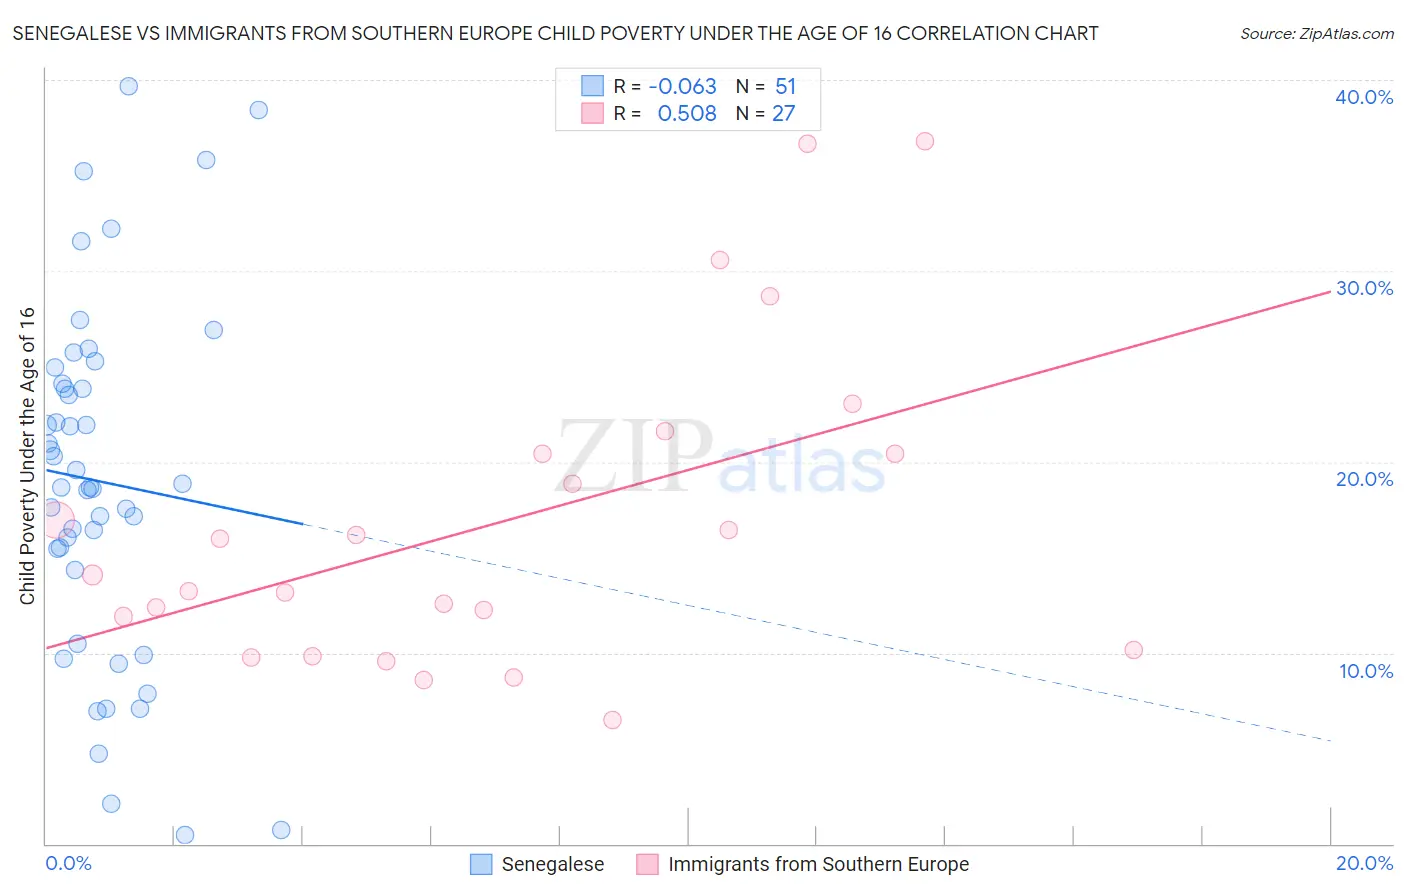 Senegalese vs Immigrants from Southern Europe Child Poverty Under the Age of 16